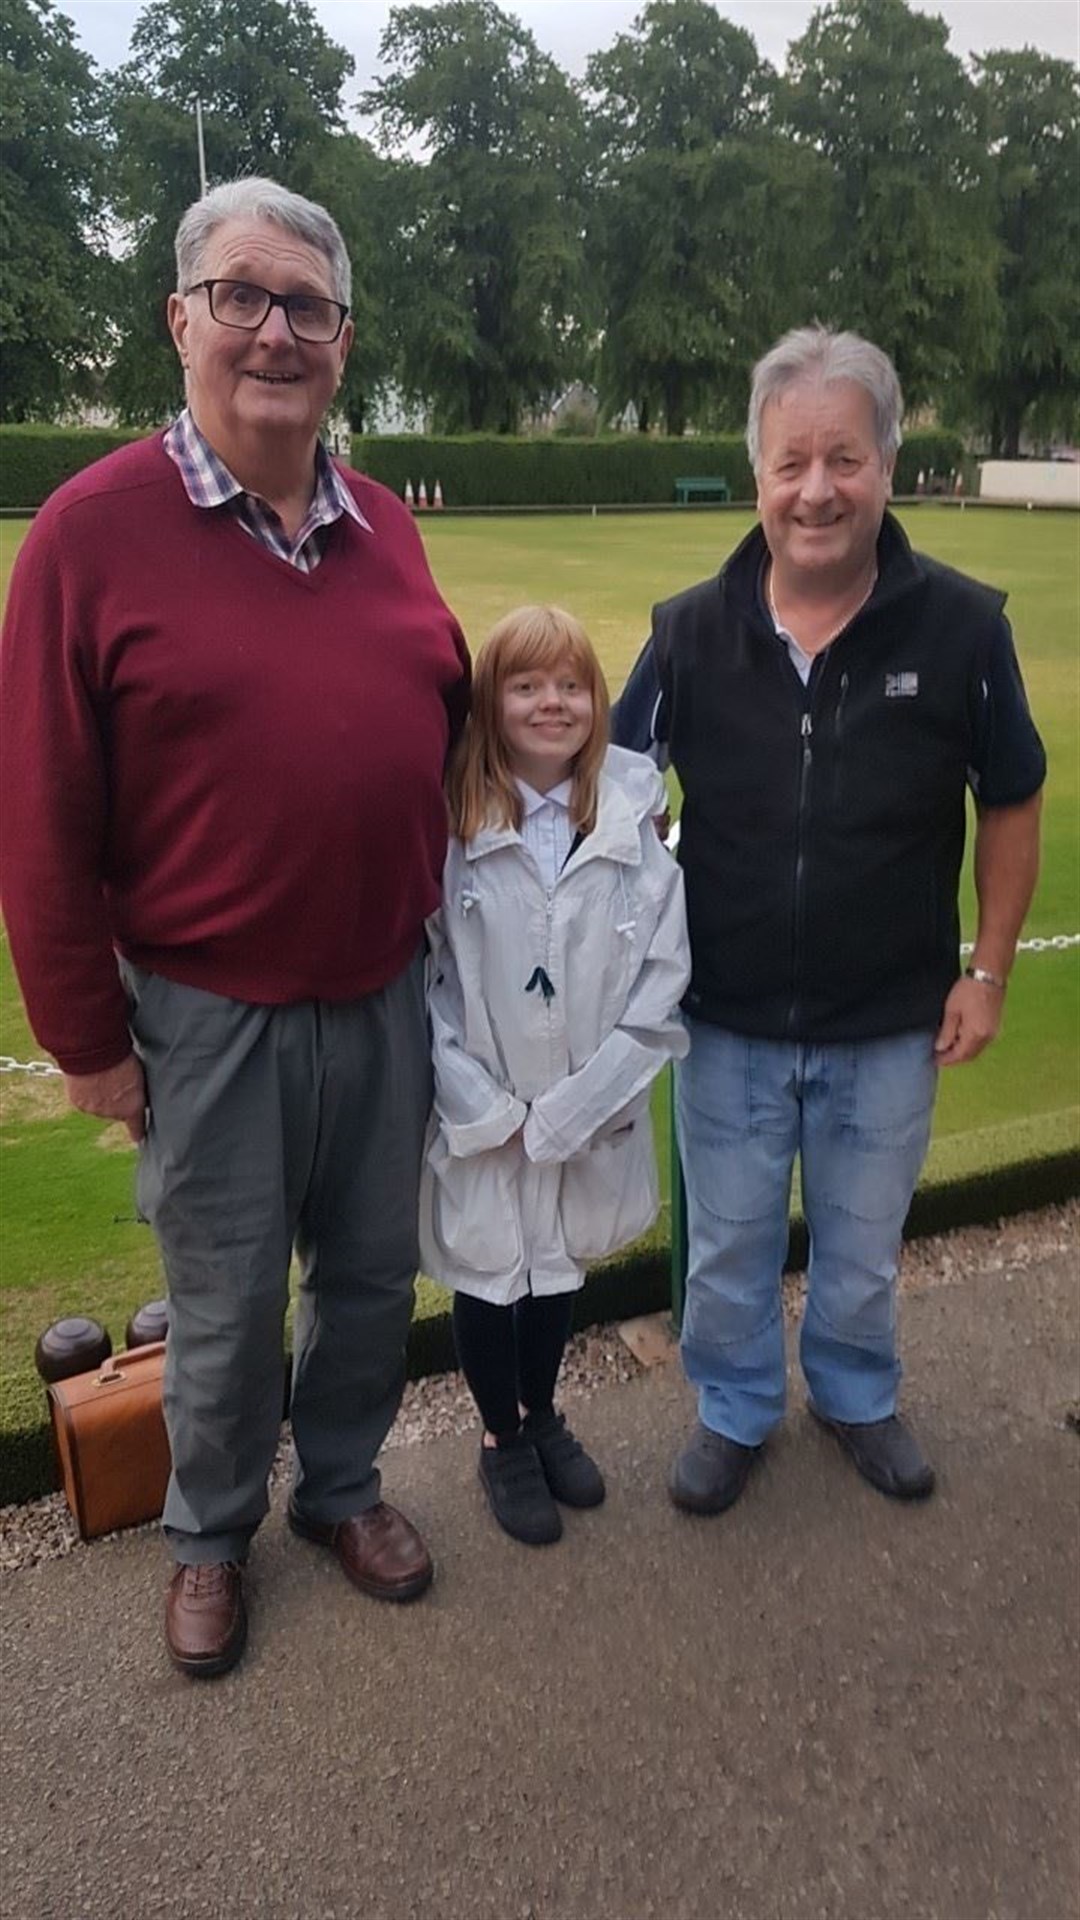 Young Forres bowler Caitlin Dustan (pictured with Derek Crosby and John Ross) is in the ladies championship quarter-finals.